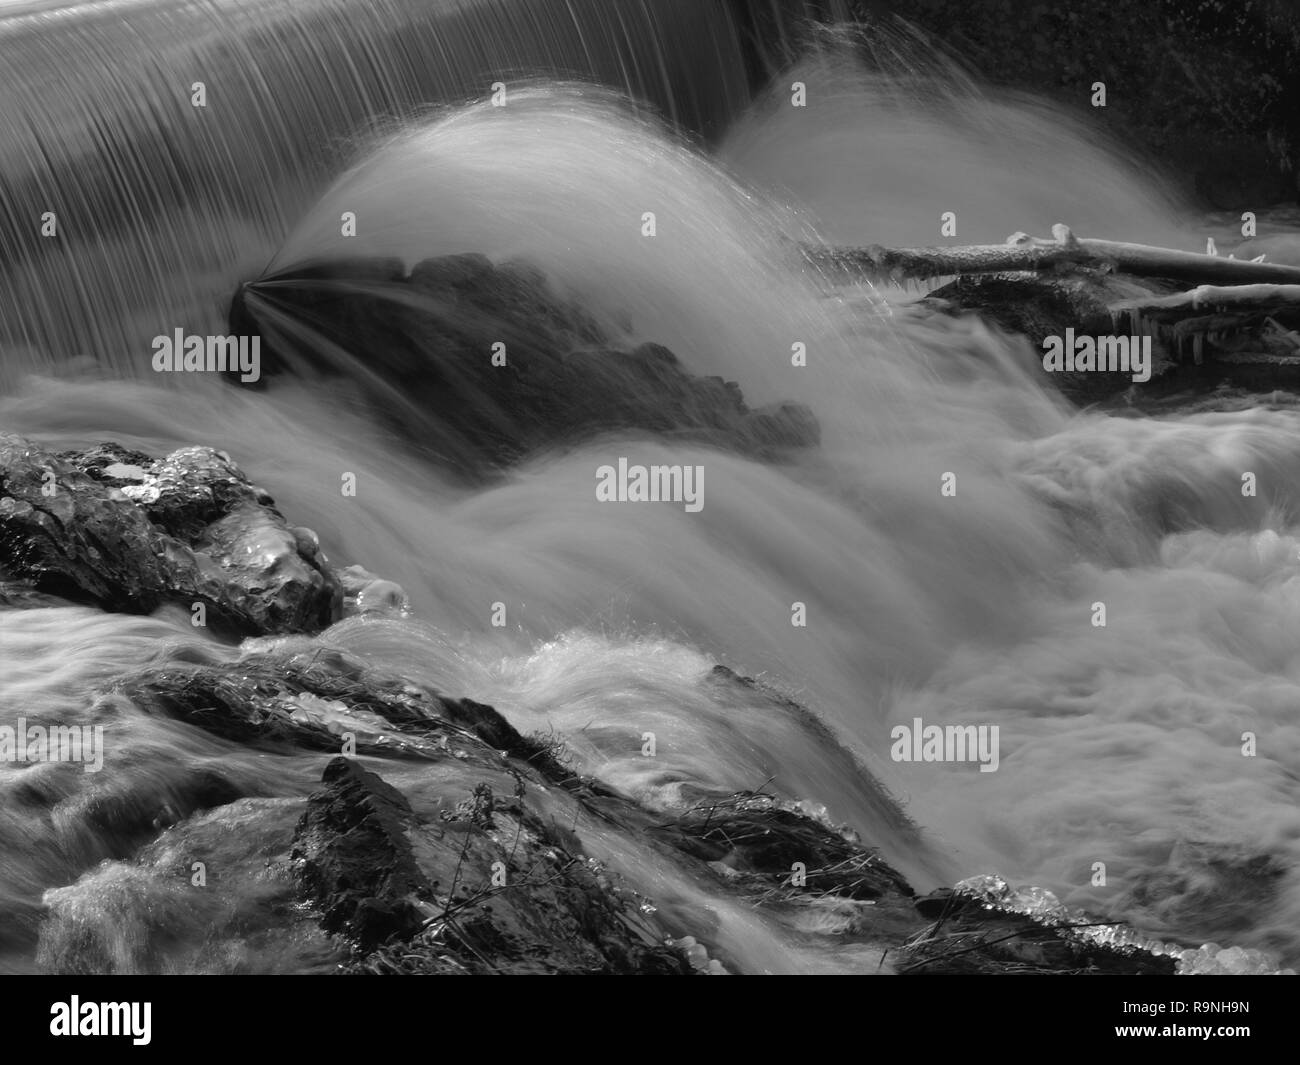 Black and white long exposure of stream in Franklin, Sussex County, NJ. Located about 50 miles from New York City. Stock Photo